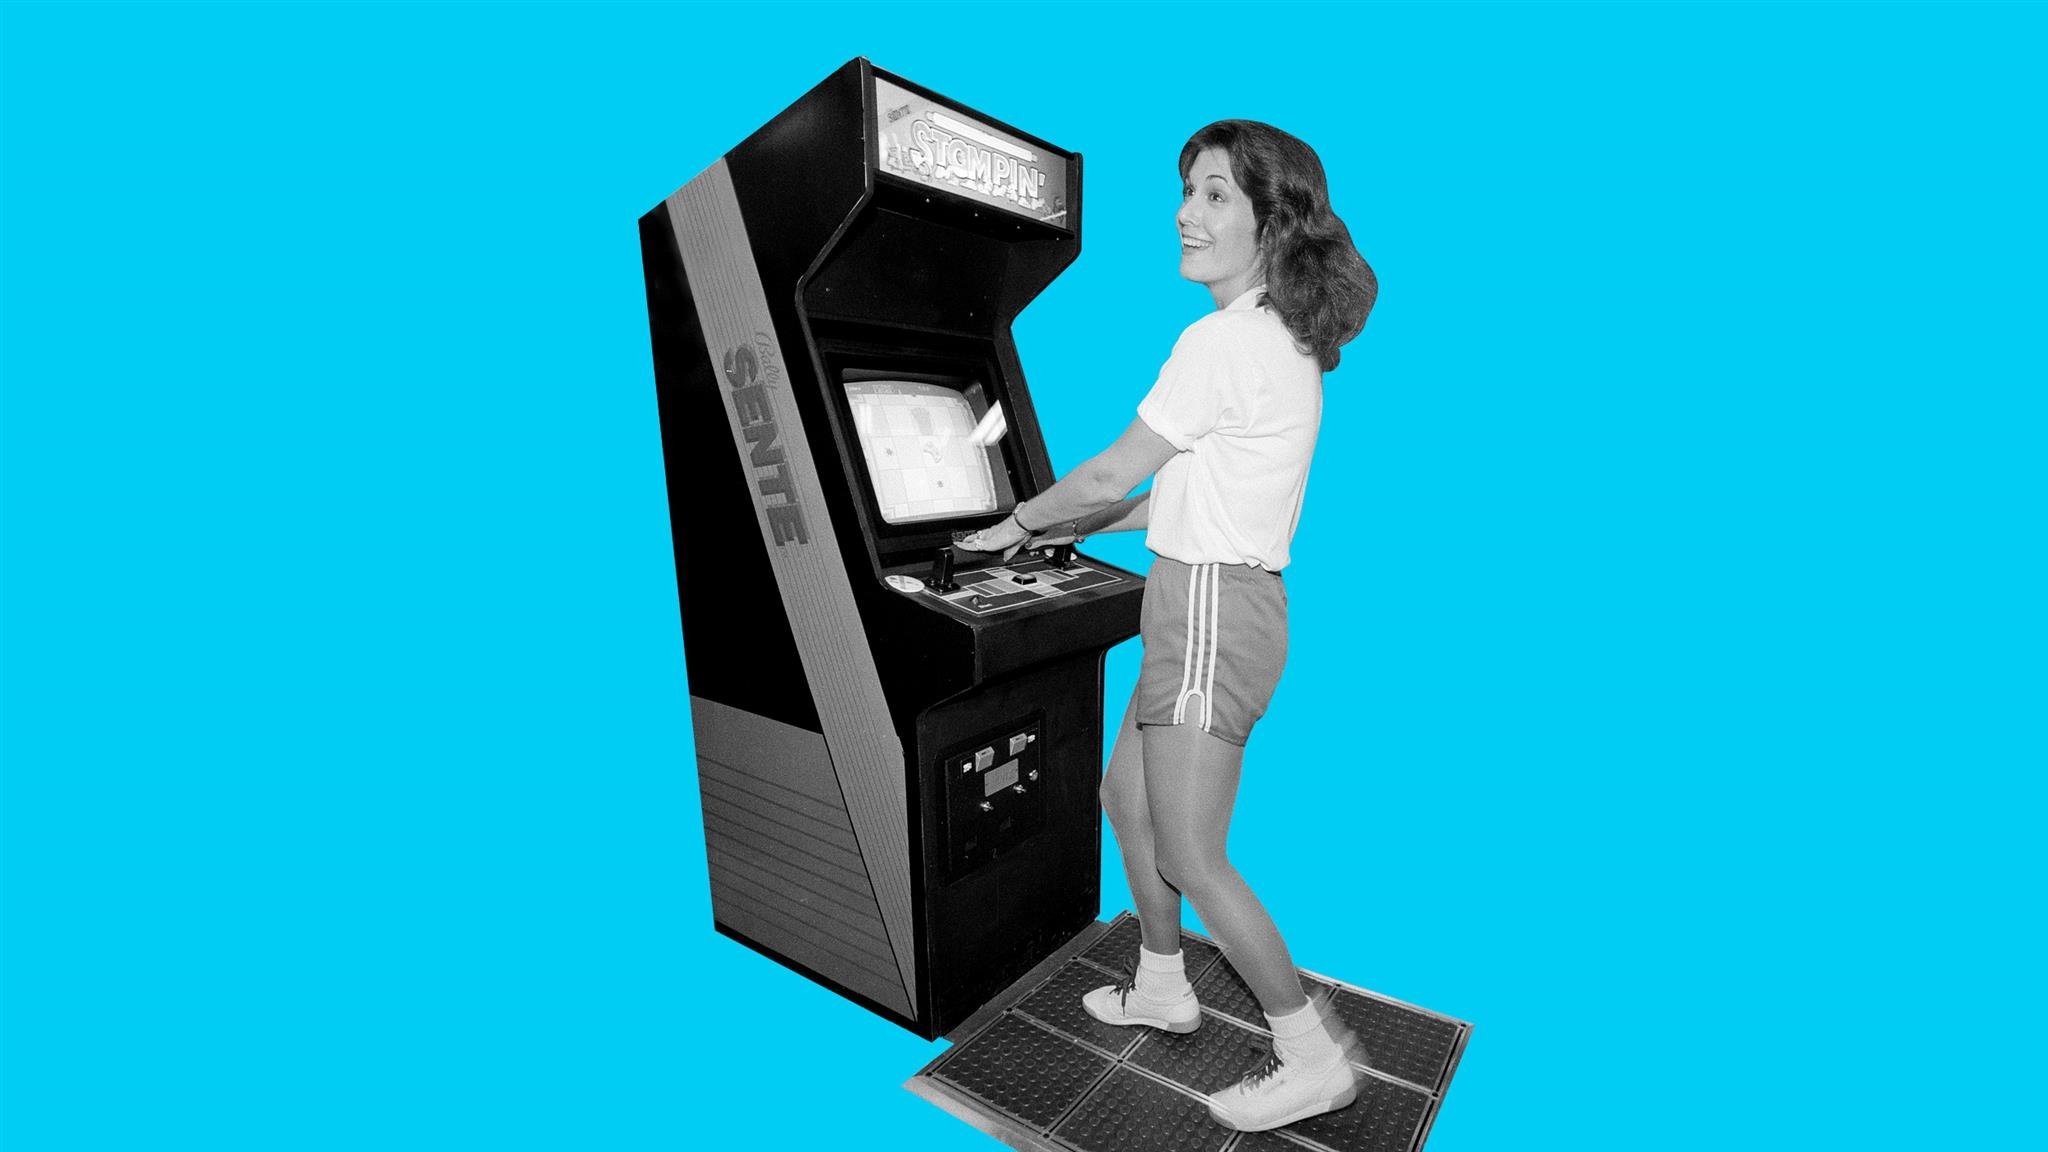 2048x1152 The renaissance of the classic arcade